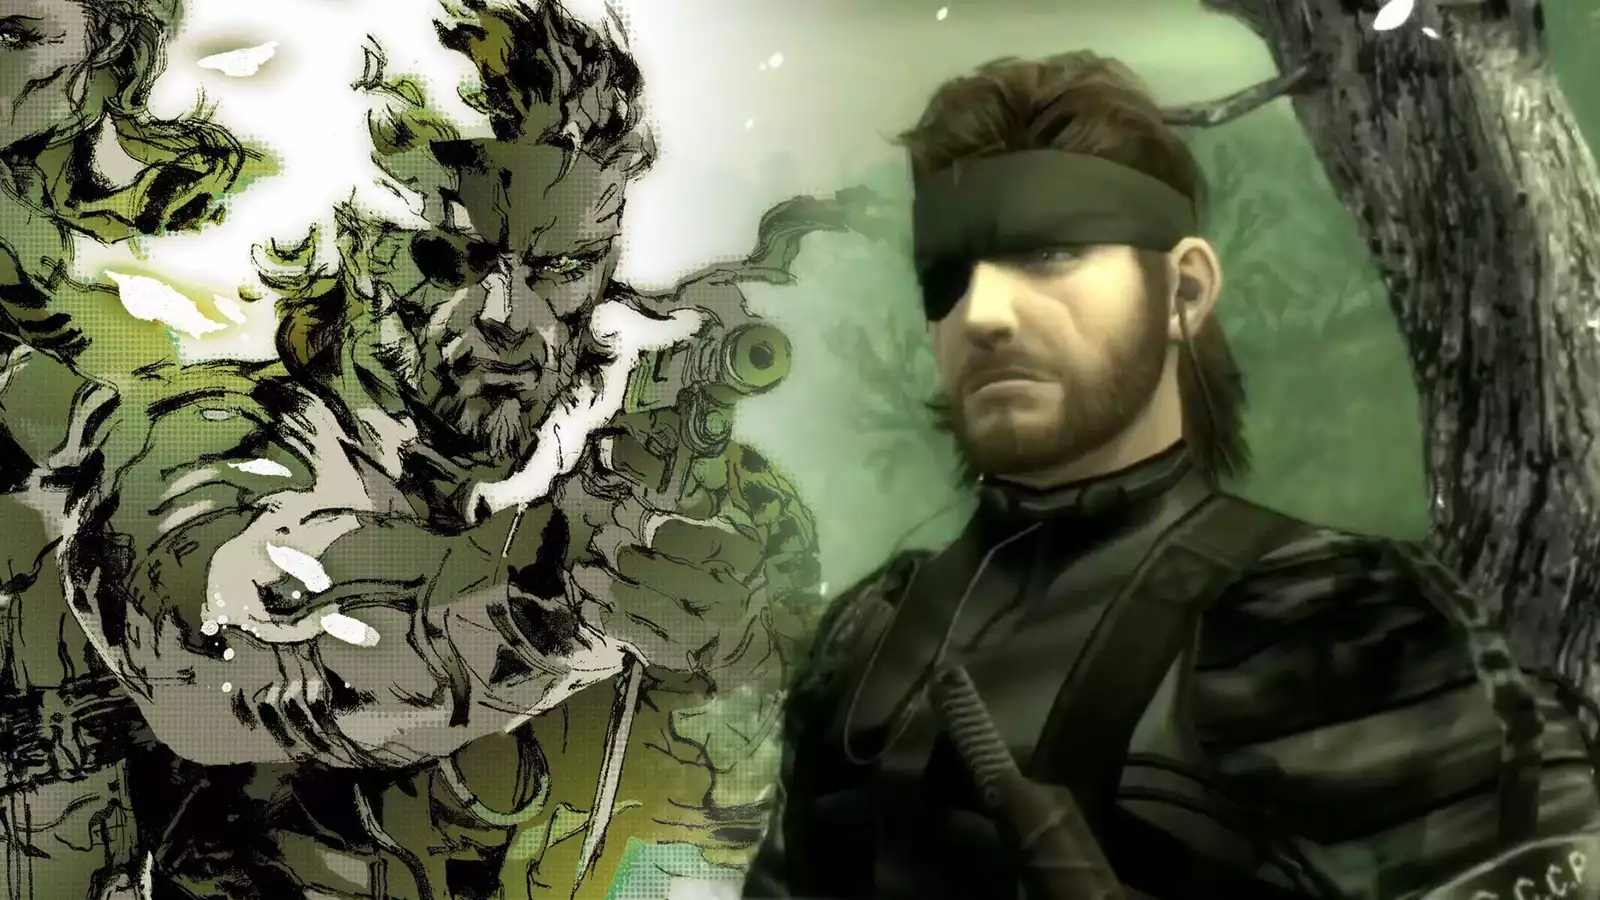 Why did Konami pick Metal Gear Solid 3 to remake?